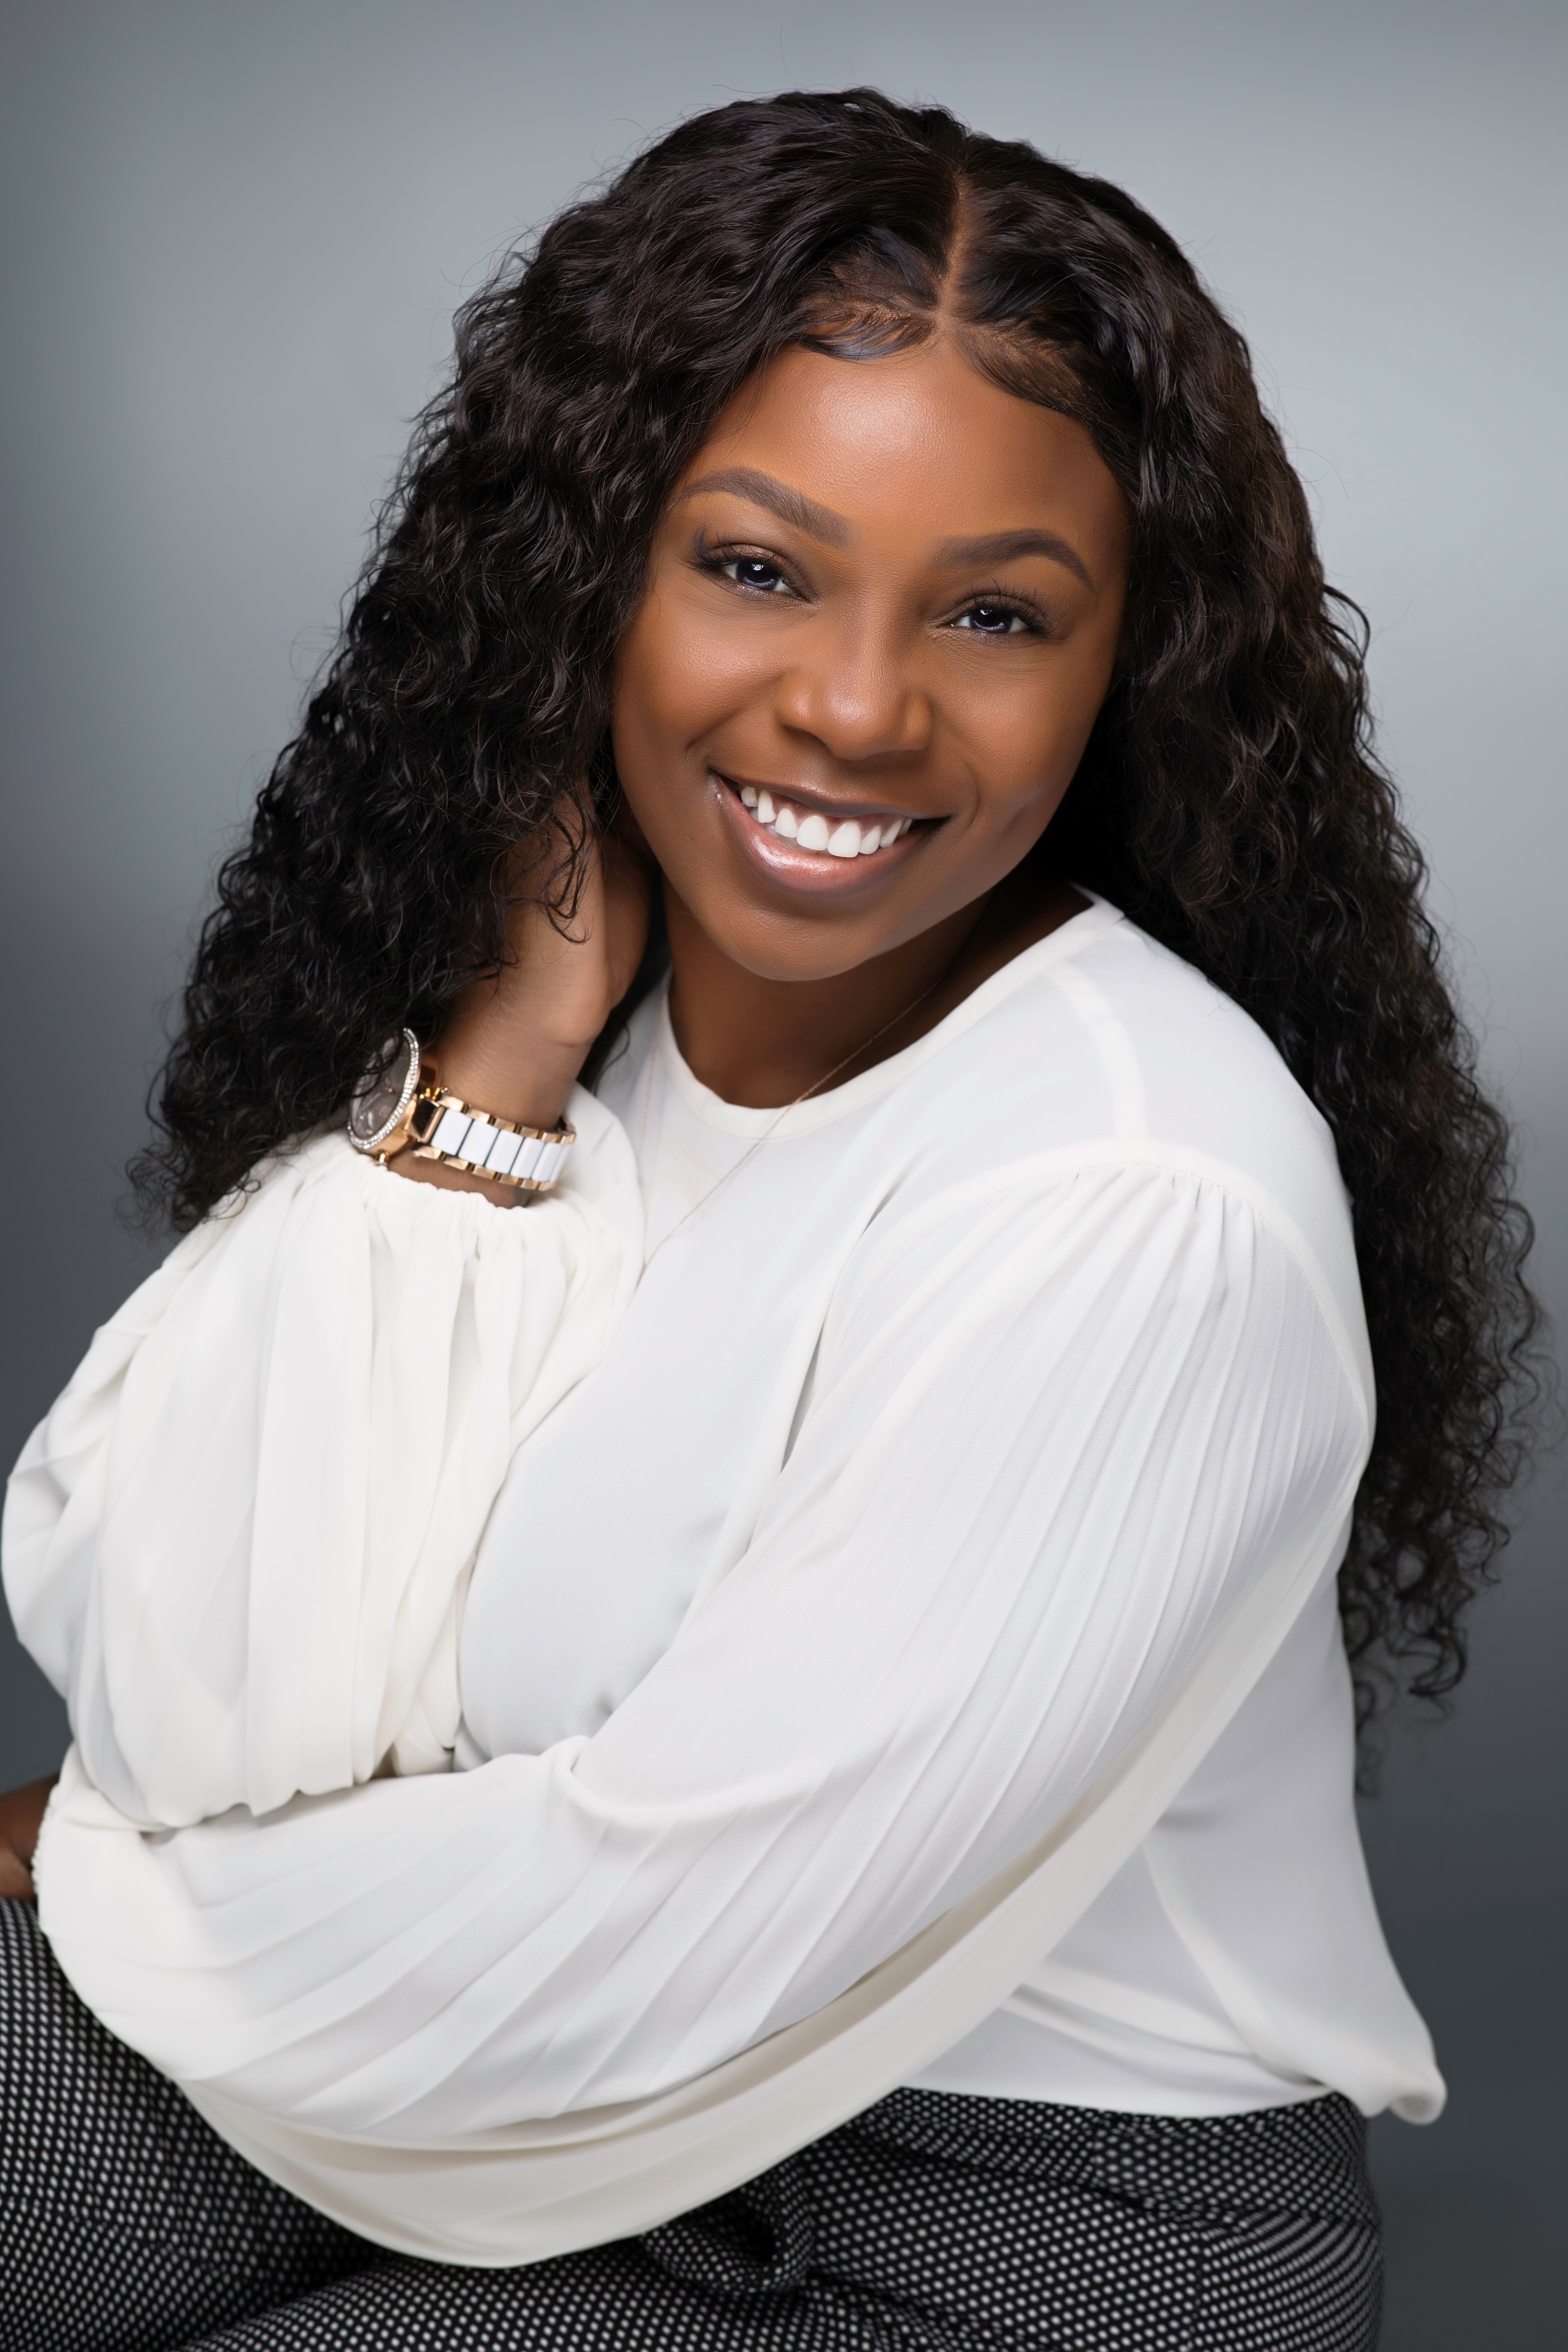 Kionna Henderson, MSU Geography PhD student and author of "If You Ain’t First, You’re Last: A Guaranteed Acceptance Guide to Successfully Transition from High School to College"